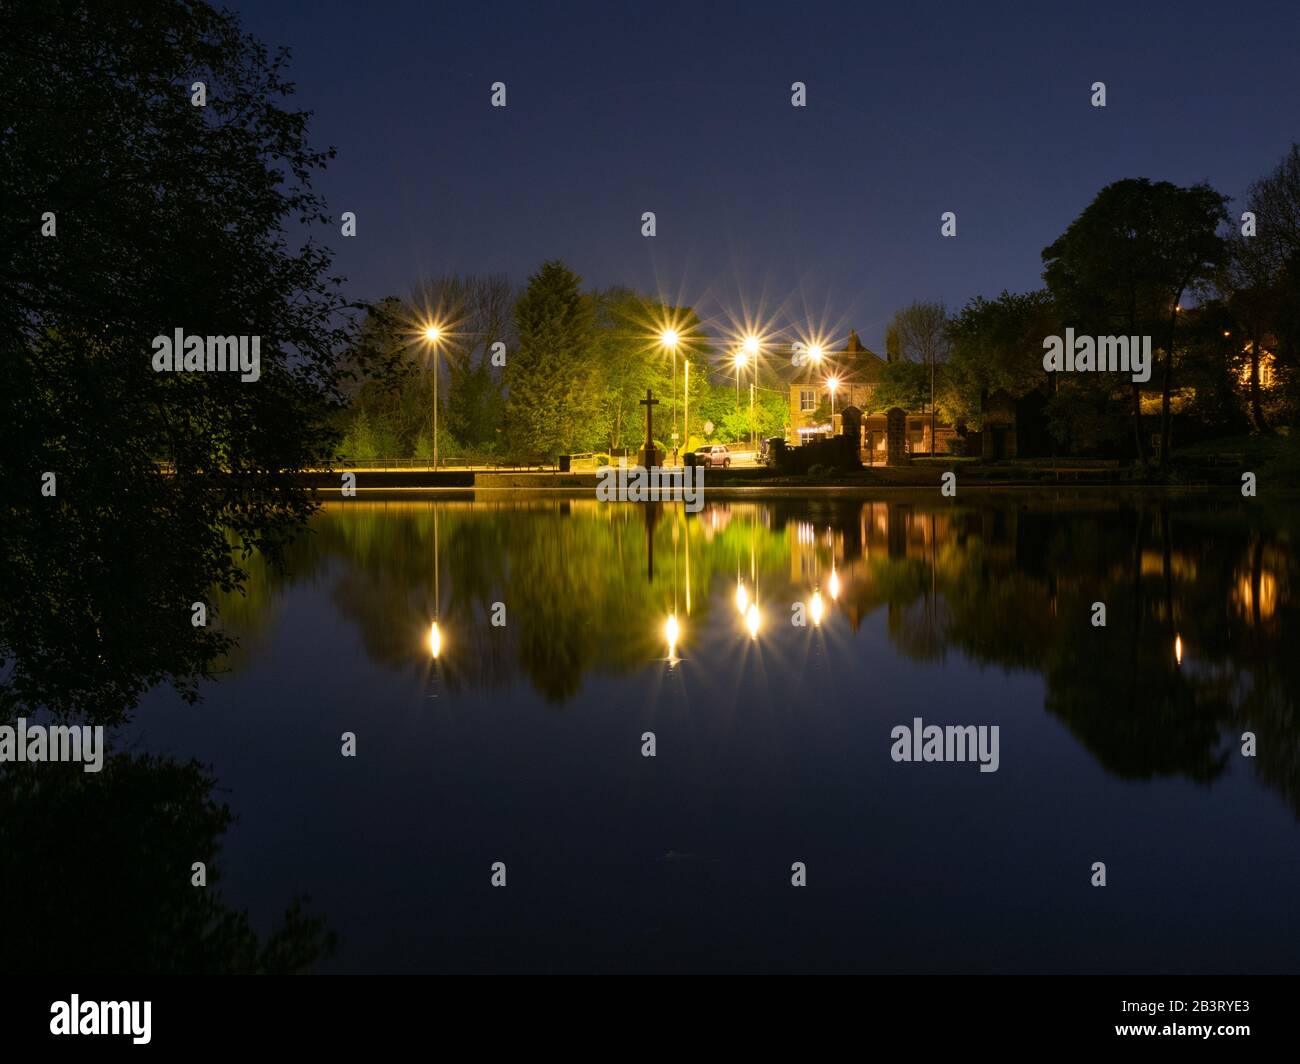 Street lights reflecting on a lake at midnight. With a war memorial in the centre, surrounded by foliage. With a clear dark blue sky. Stock Photo